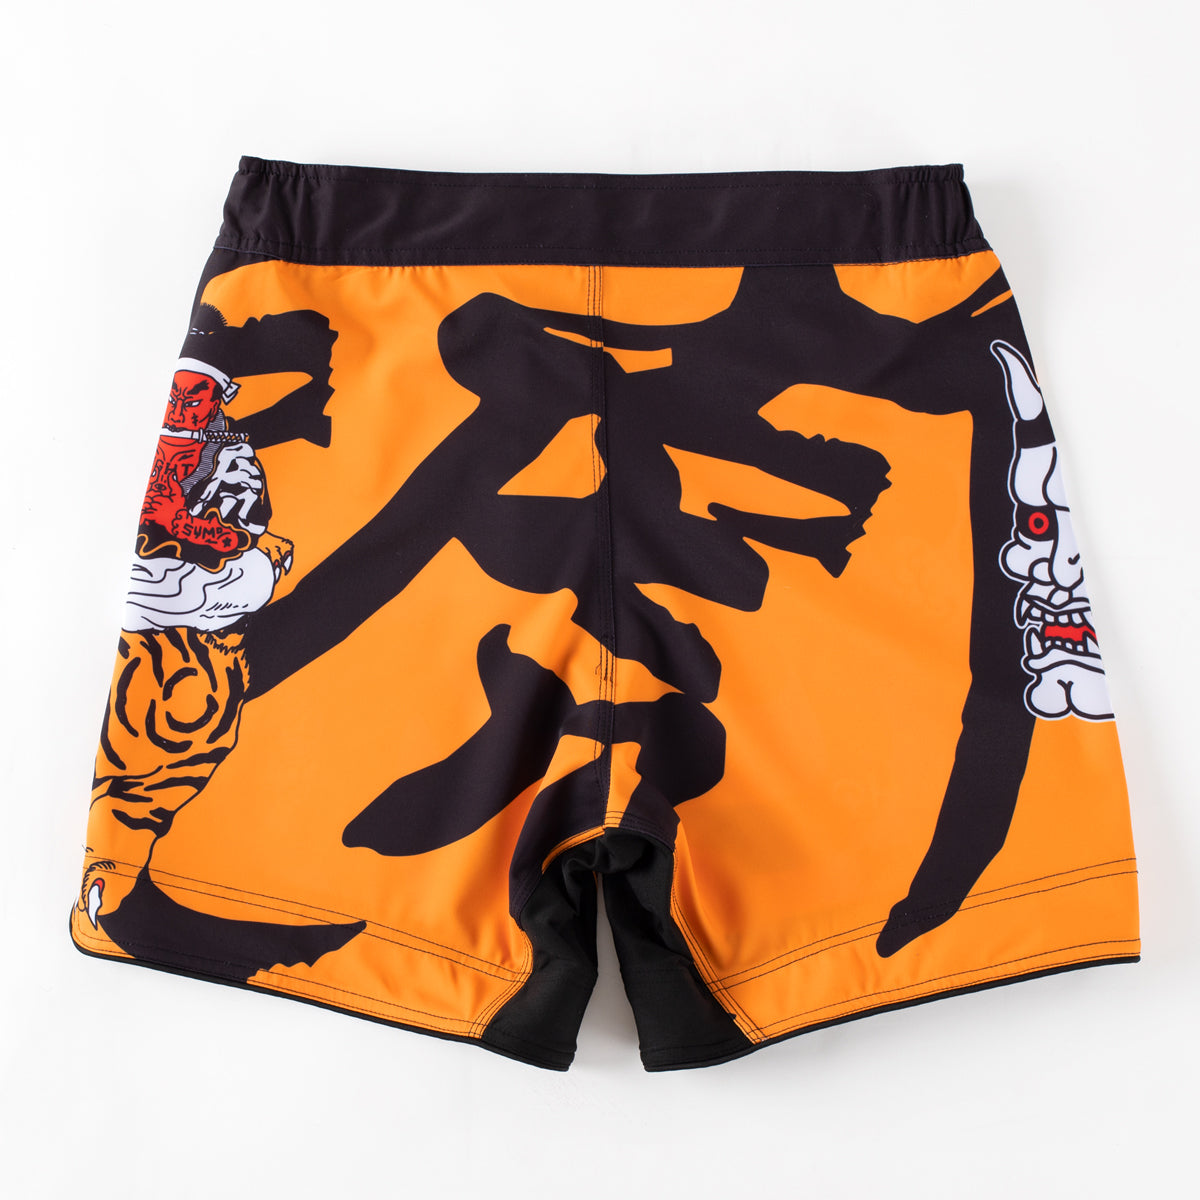 Half Sumo X HQ "Year of the Tiger" Shorts